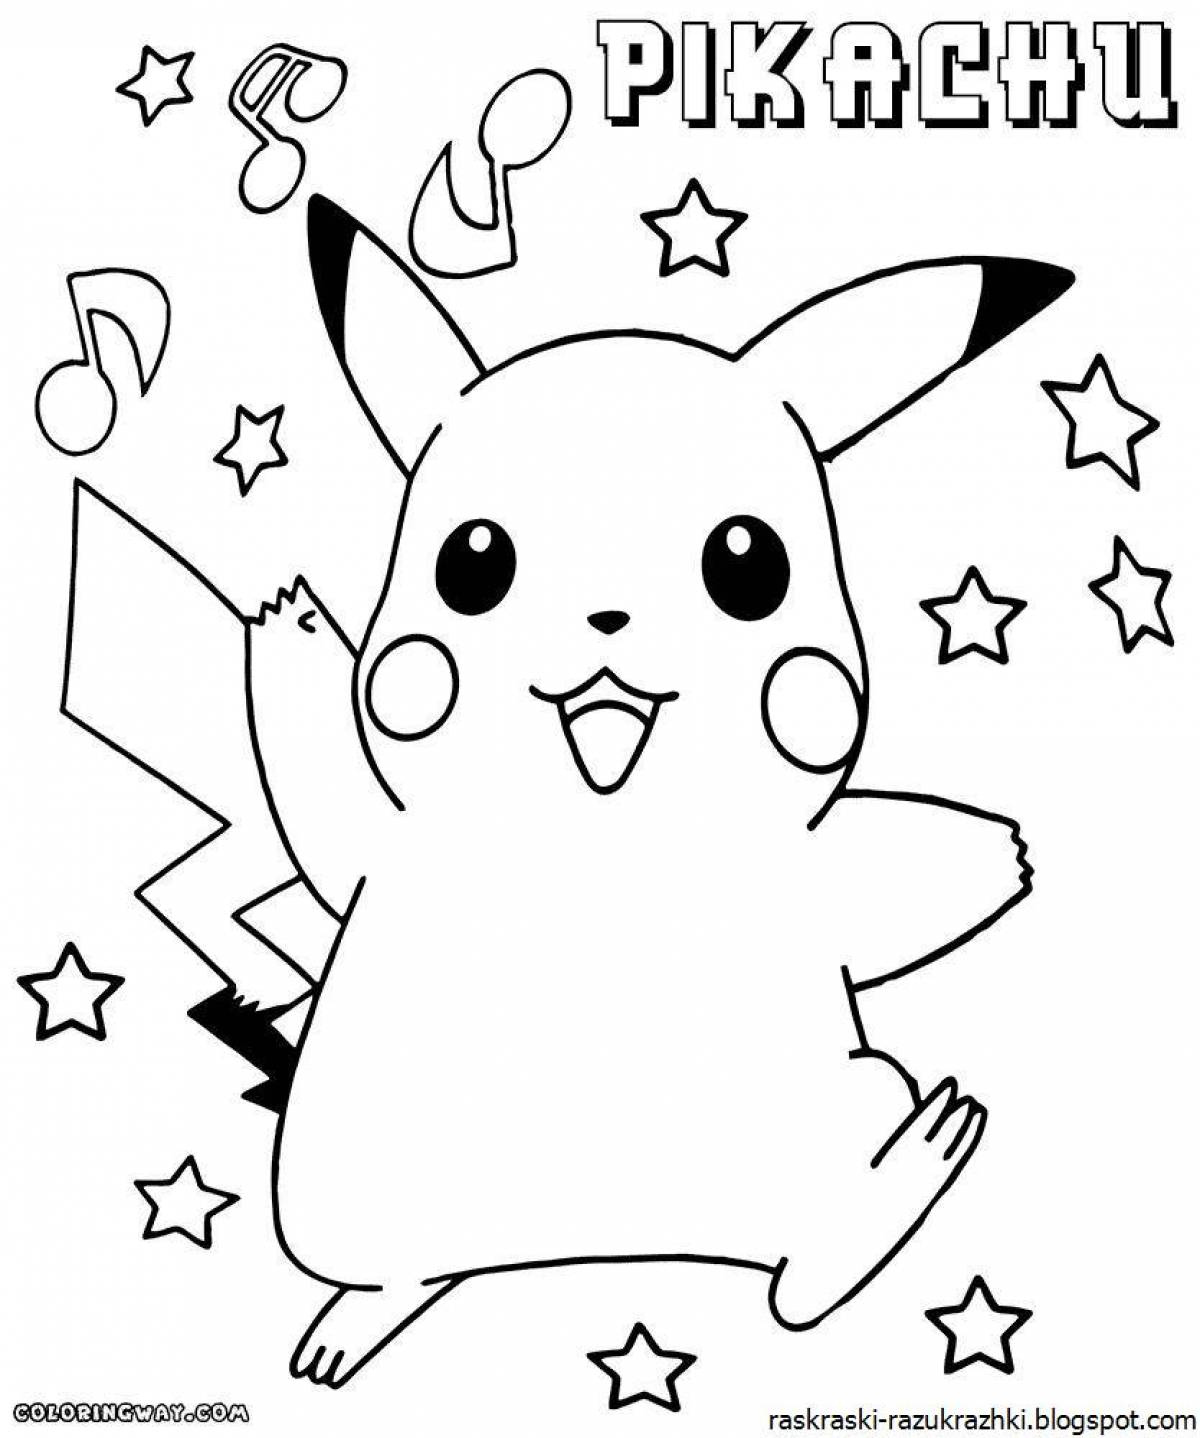 Sparkling New Year's Pikachu